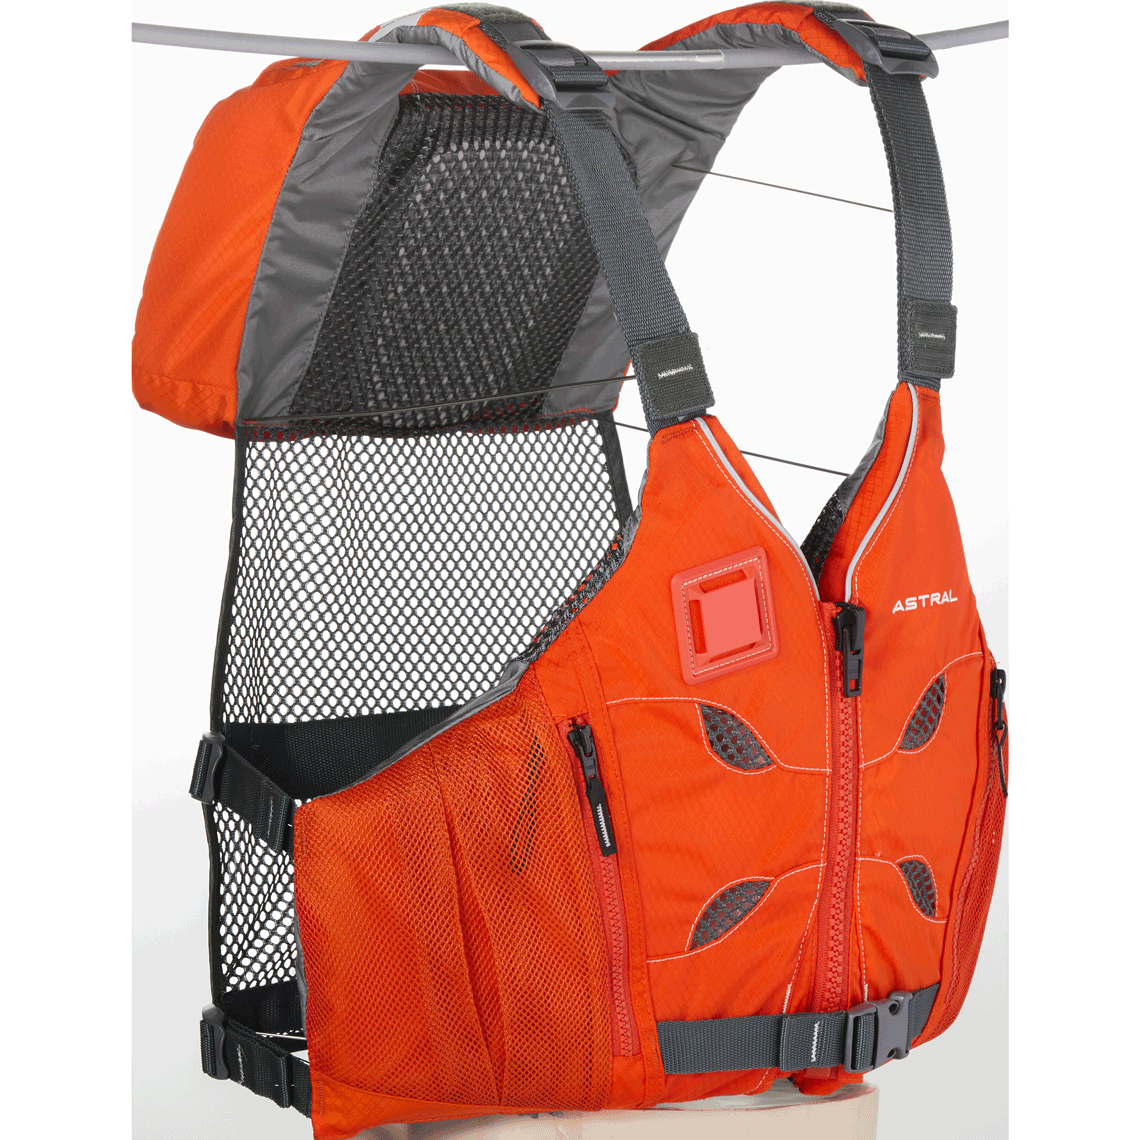 Life jacket clipped product photograph